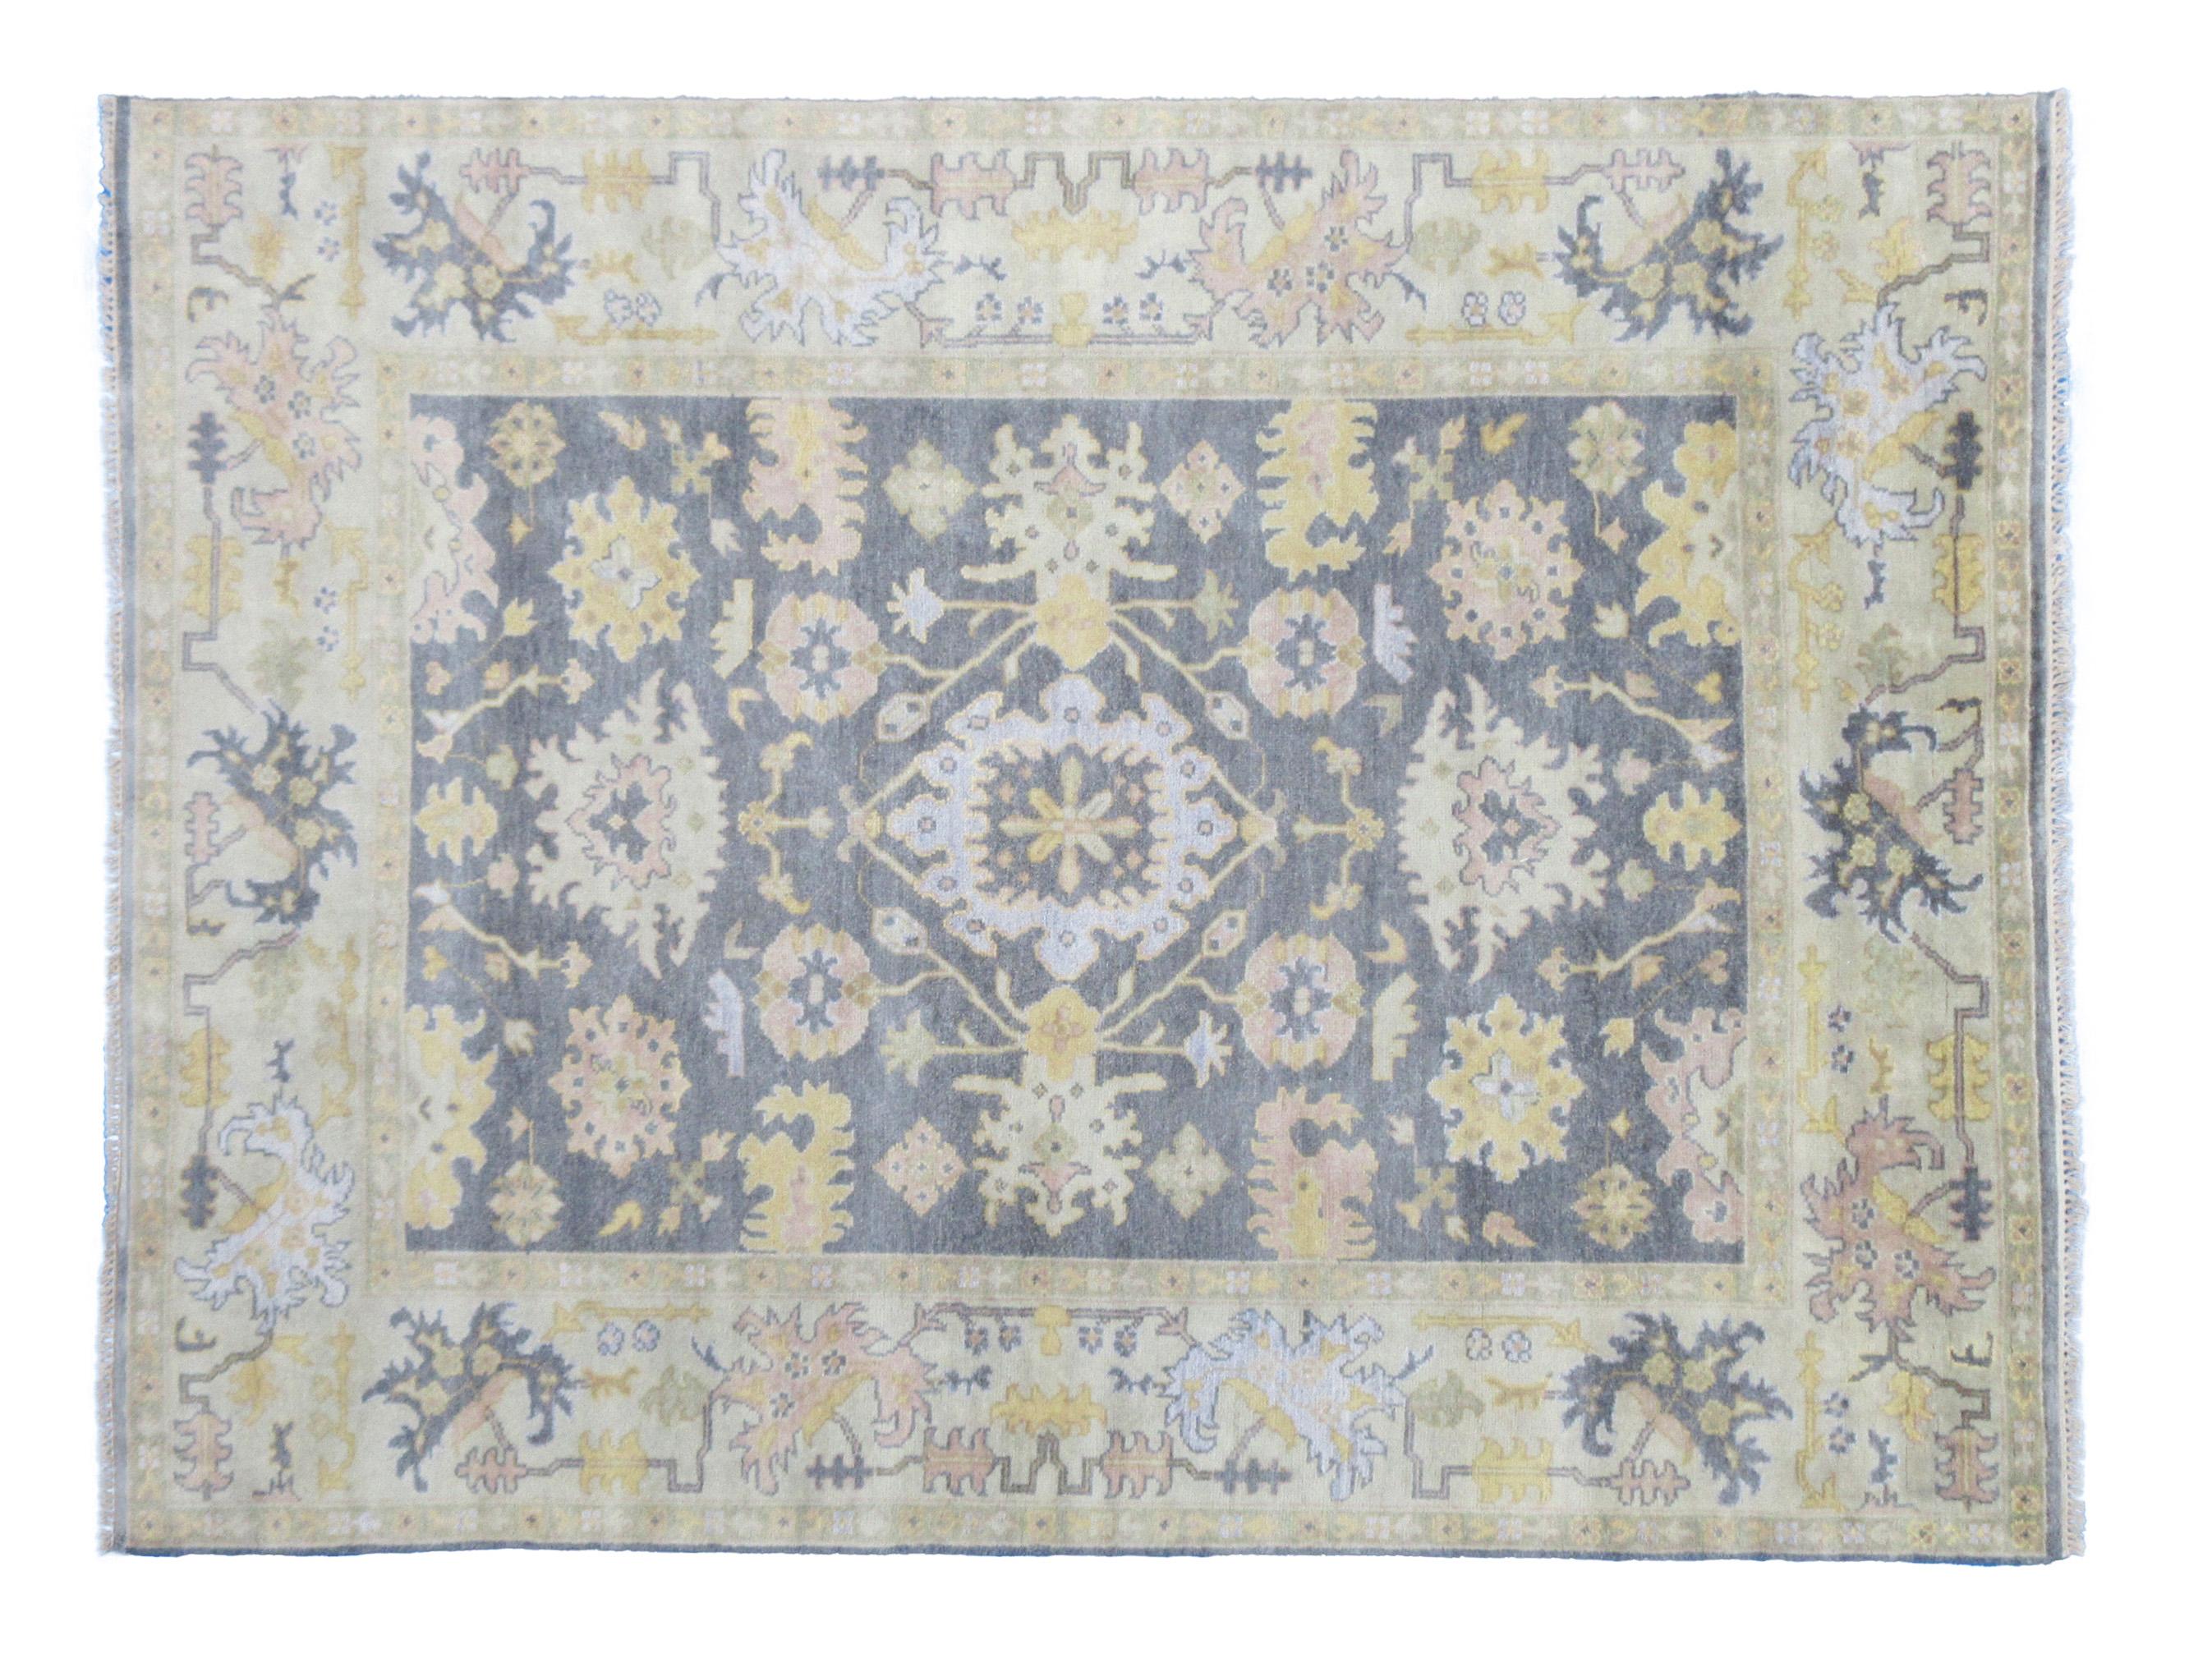 Hand-knotted, wool pile on a cotton foundation.

Dimensions: 8' x 10'

Field color: Gray

Border color: Light-Blue

Accent colors: Yellow.